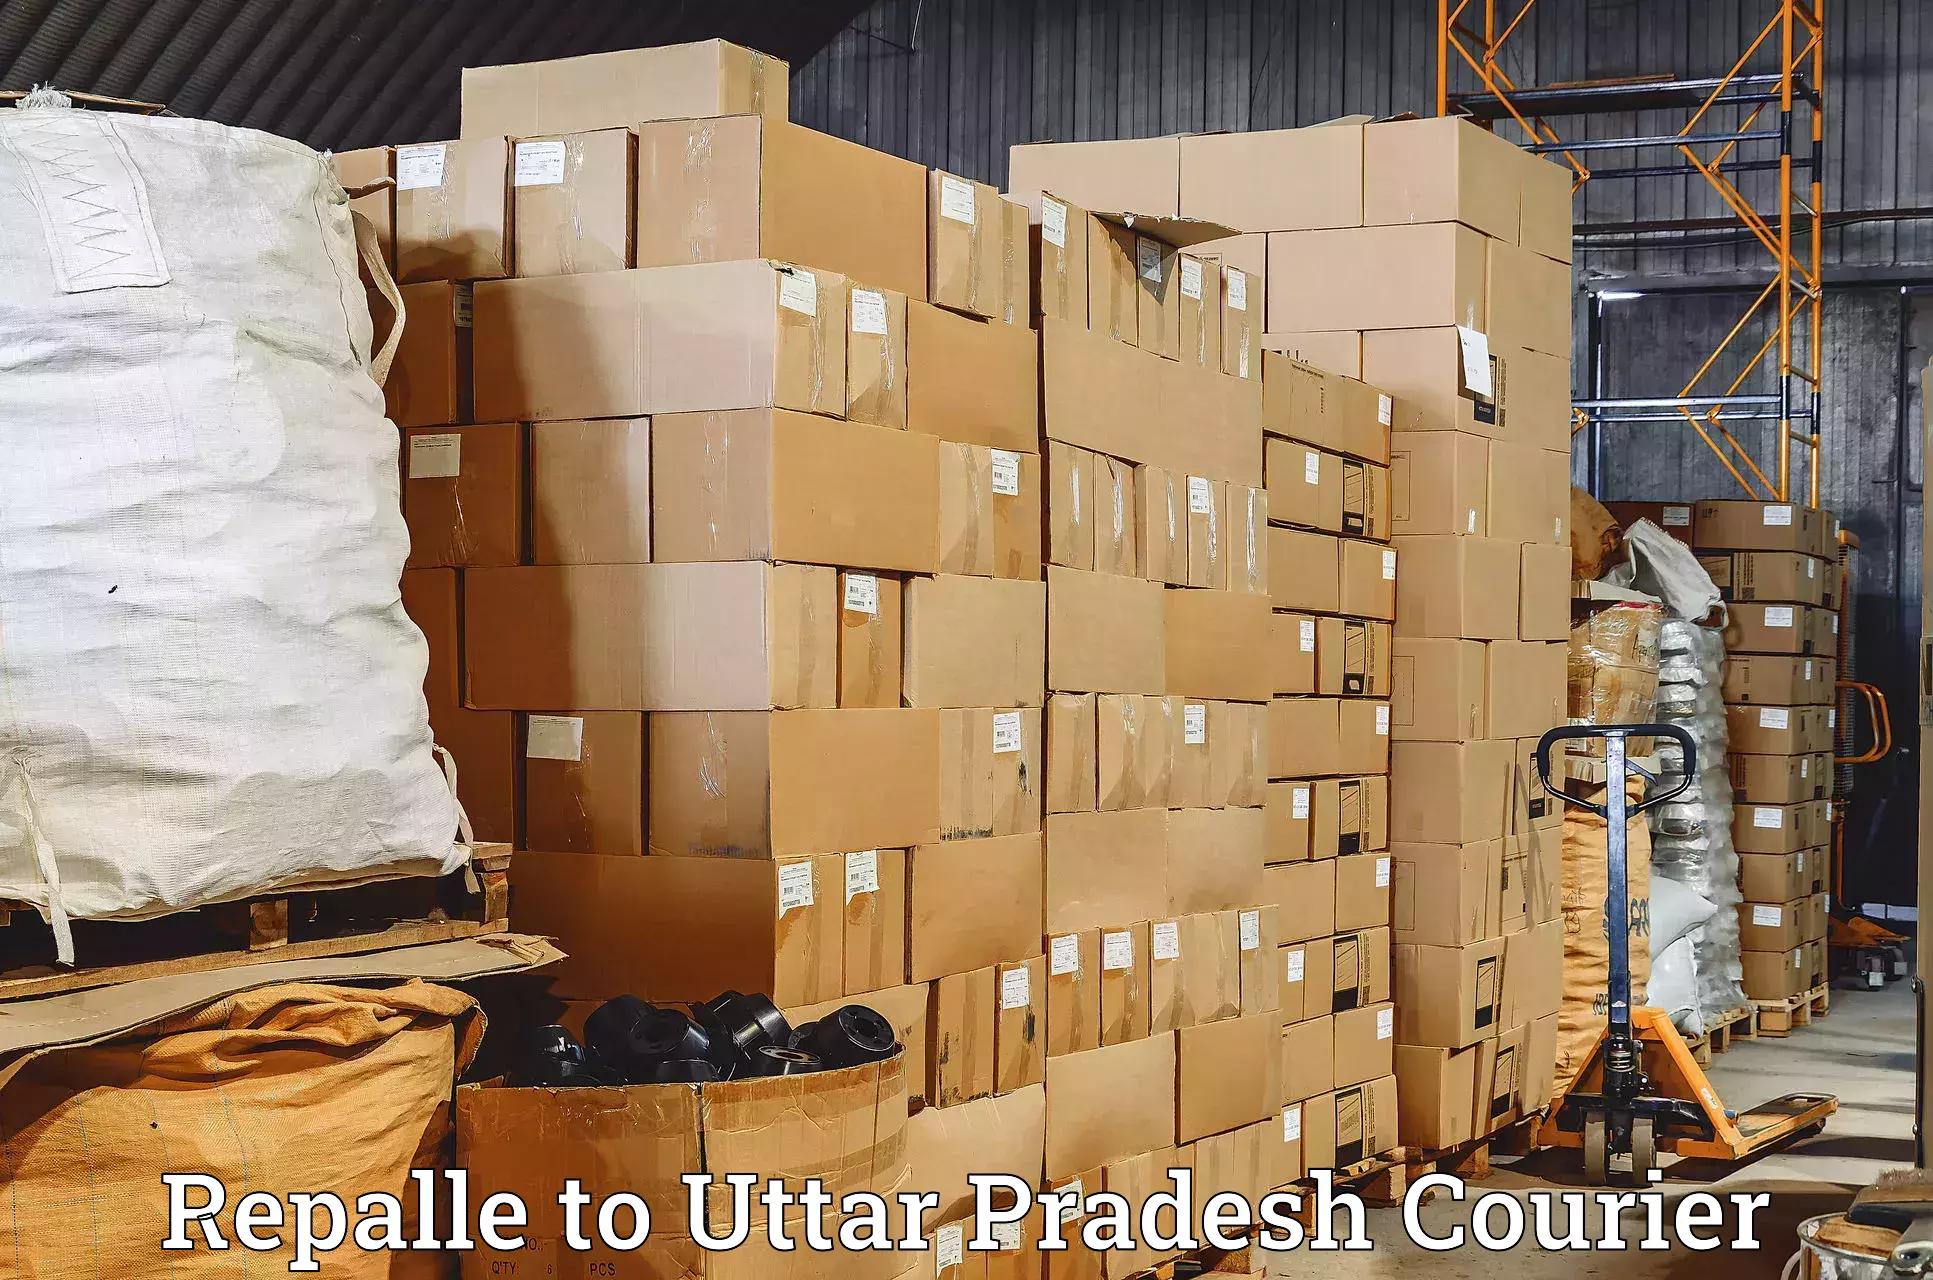 Automated parcel services Repalle to Chopan